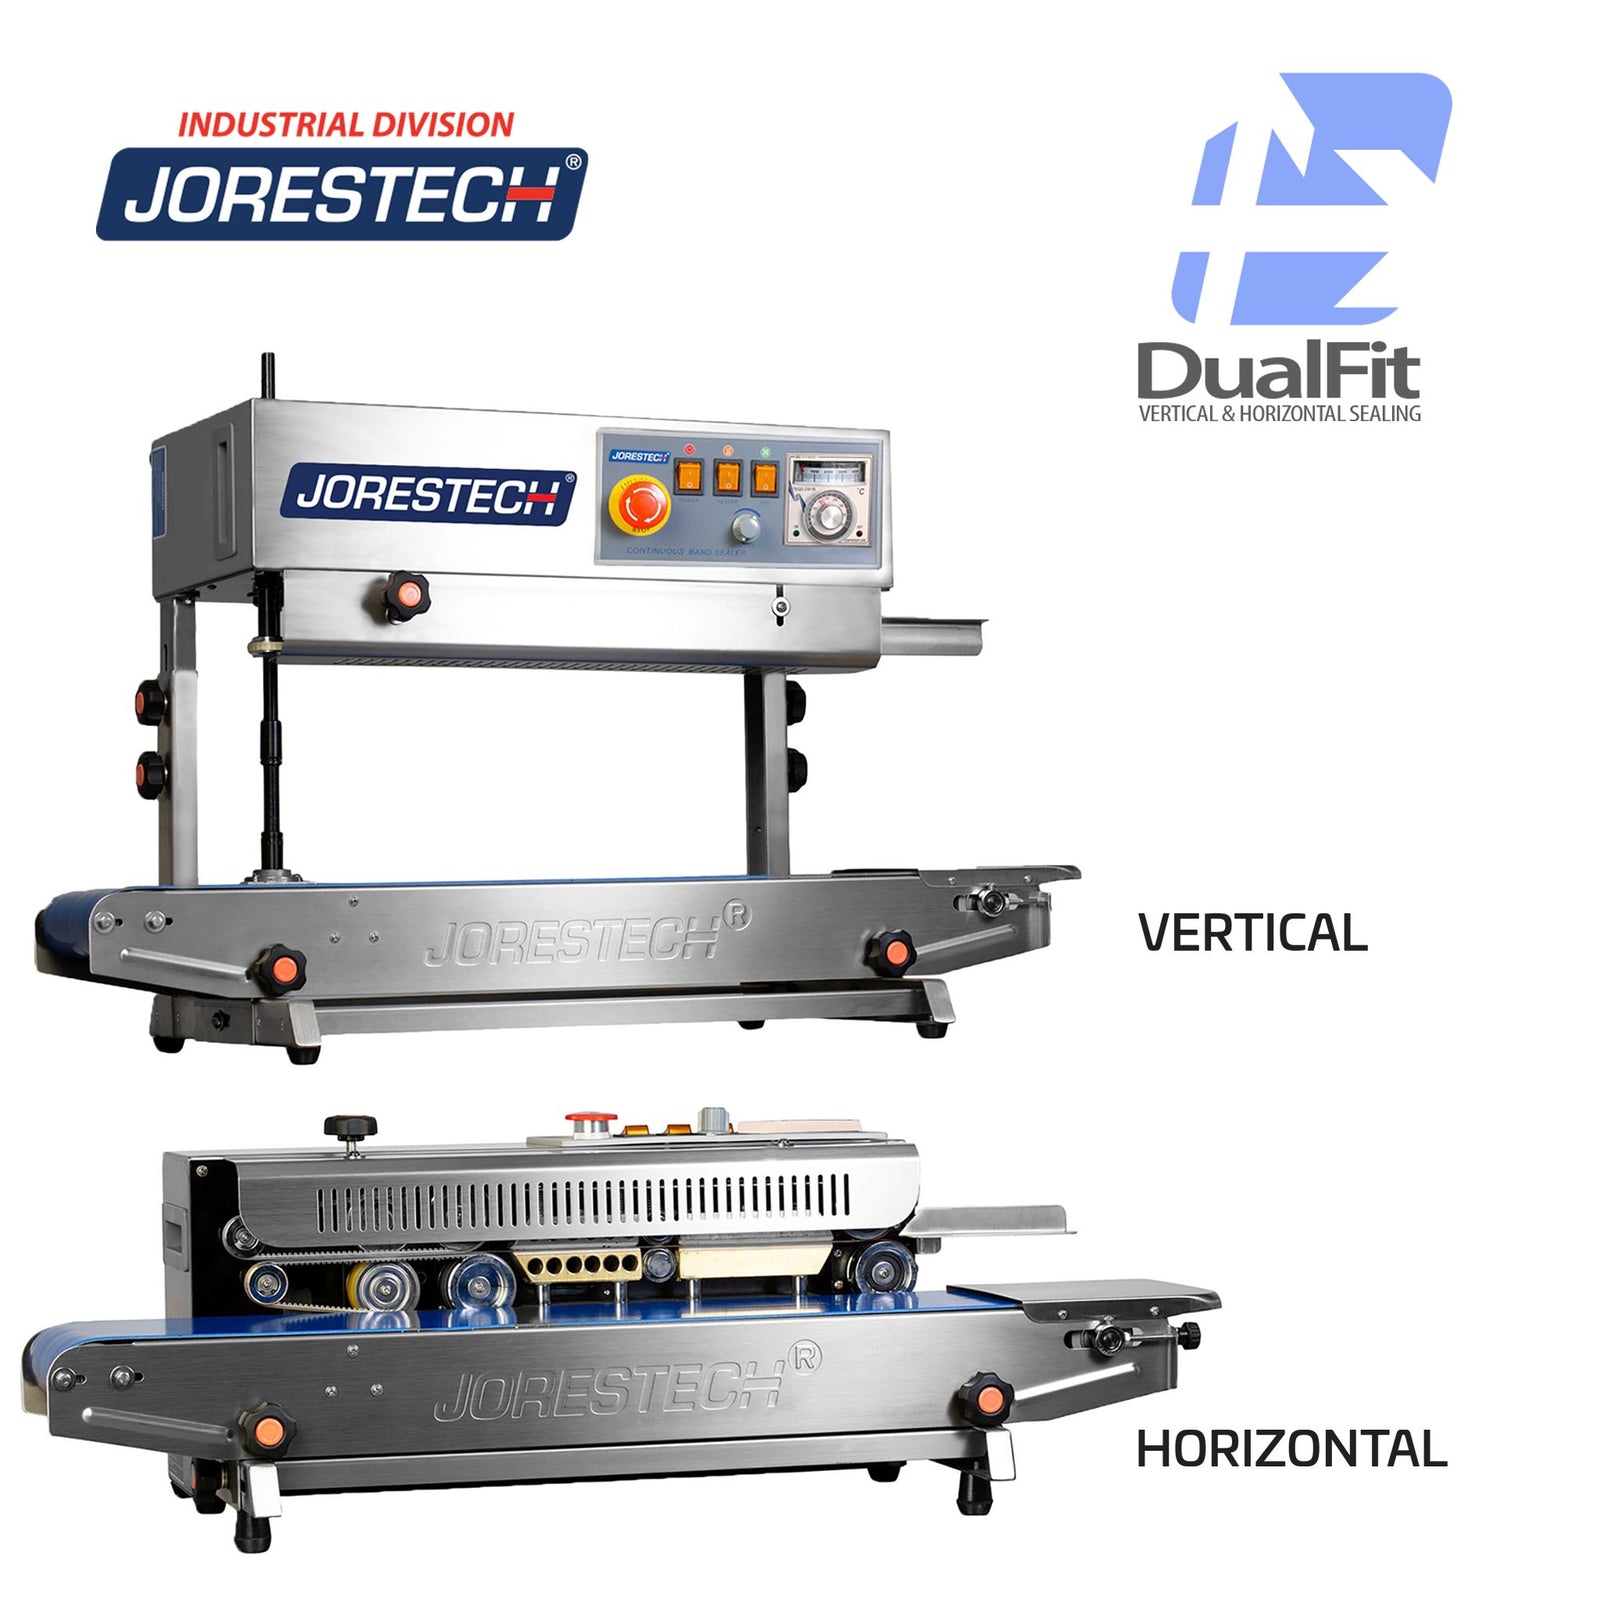 showing the vertical and horizontal positioning of the  stainless steel JORESTECH continuous band sealer. Dual fit logo with arrows indicate that this table top bag sealer can be used for vertical and for horizontal applications. 